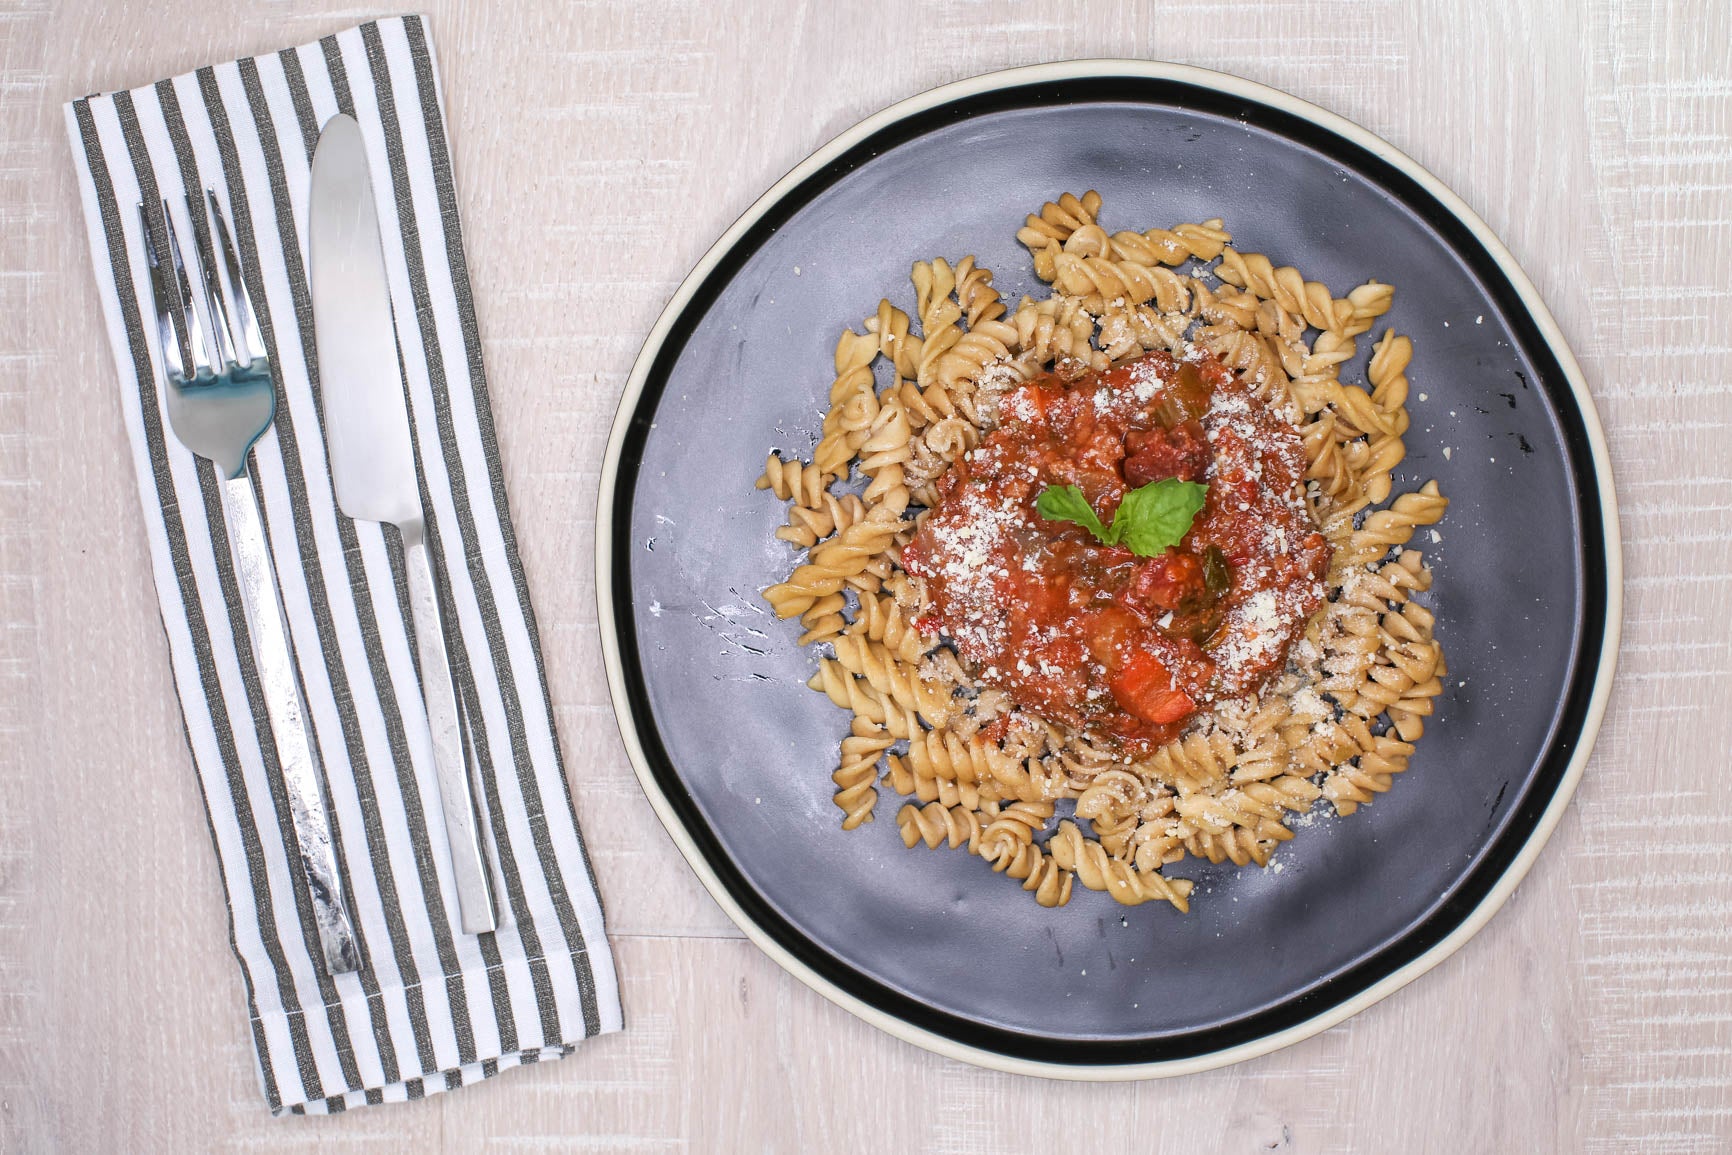 Slow-Cooked Beef Bolognese Sauce over Whole Wheat Pasta